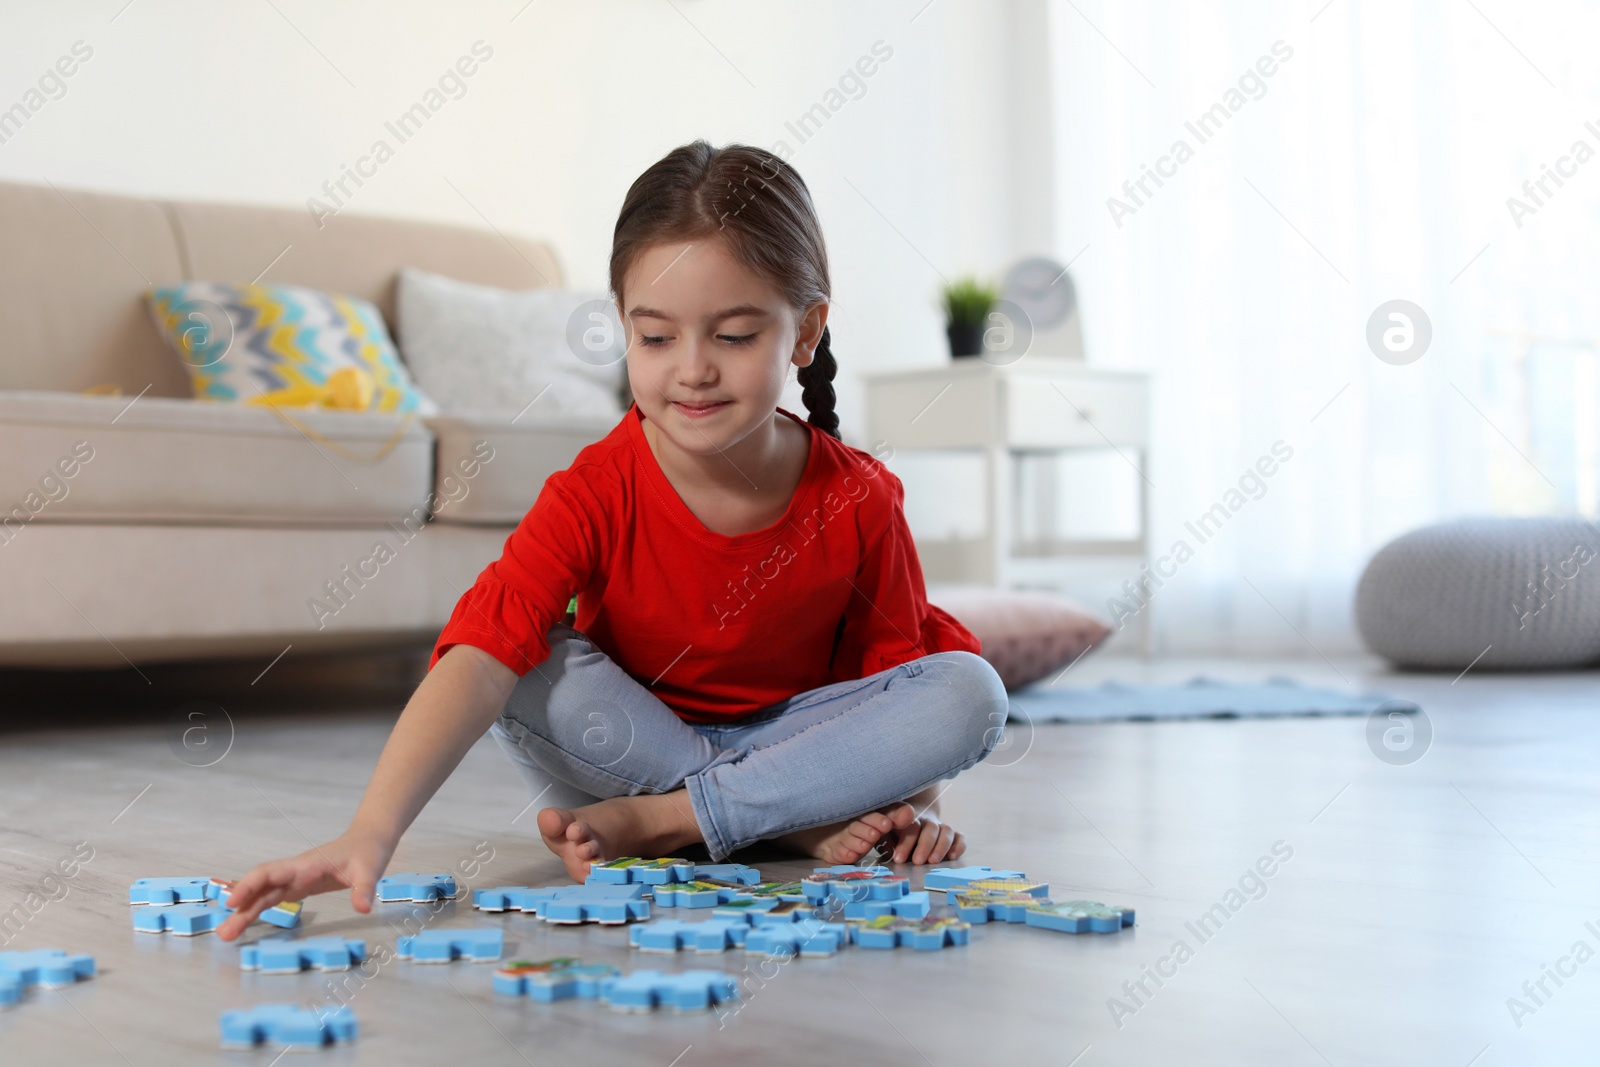 Photo of Cute little child playing with puzzles on floor indoors. Space for text